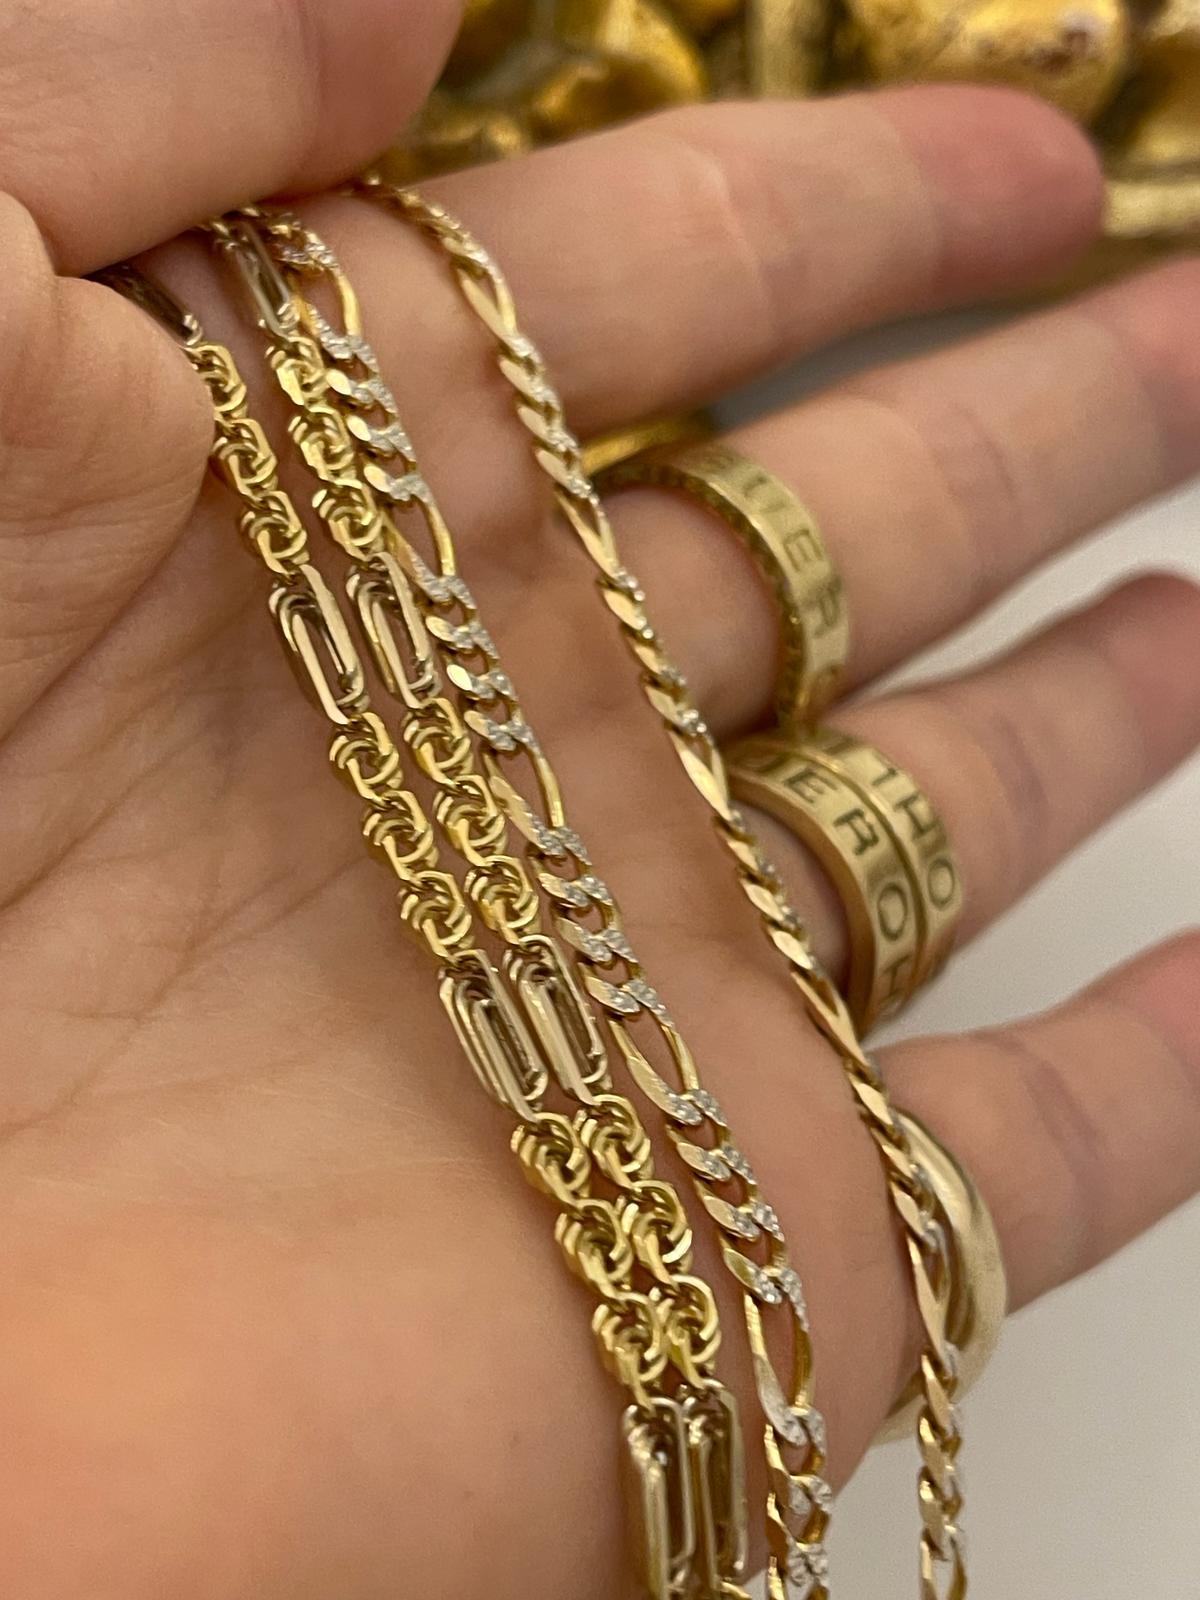 18k white and yellow gold chain
Fancy link
Ready to ship

15.21grams
cm long
link width: 3-4mm

solid links not hollow



ABOUT THE BRAND

Once shrouded in mystery, the story of Ohliguer emerged from the not-too-distant past. A great grandmother